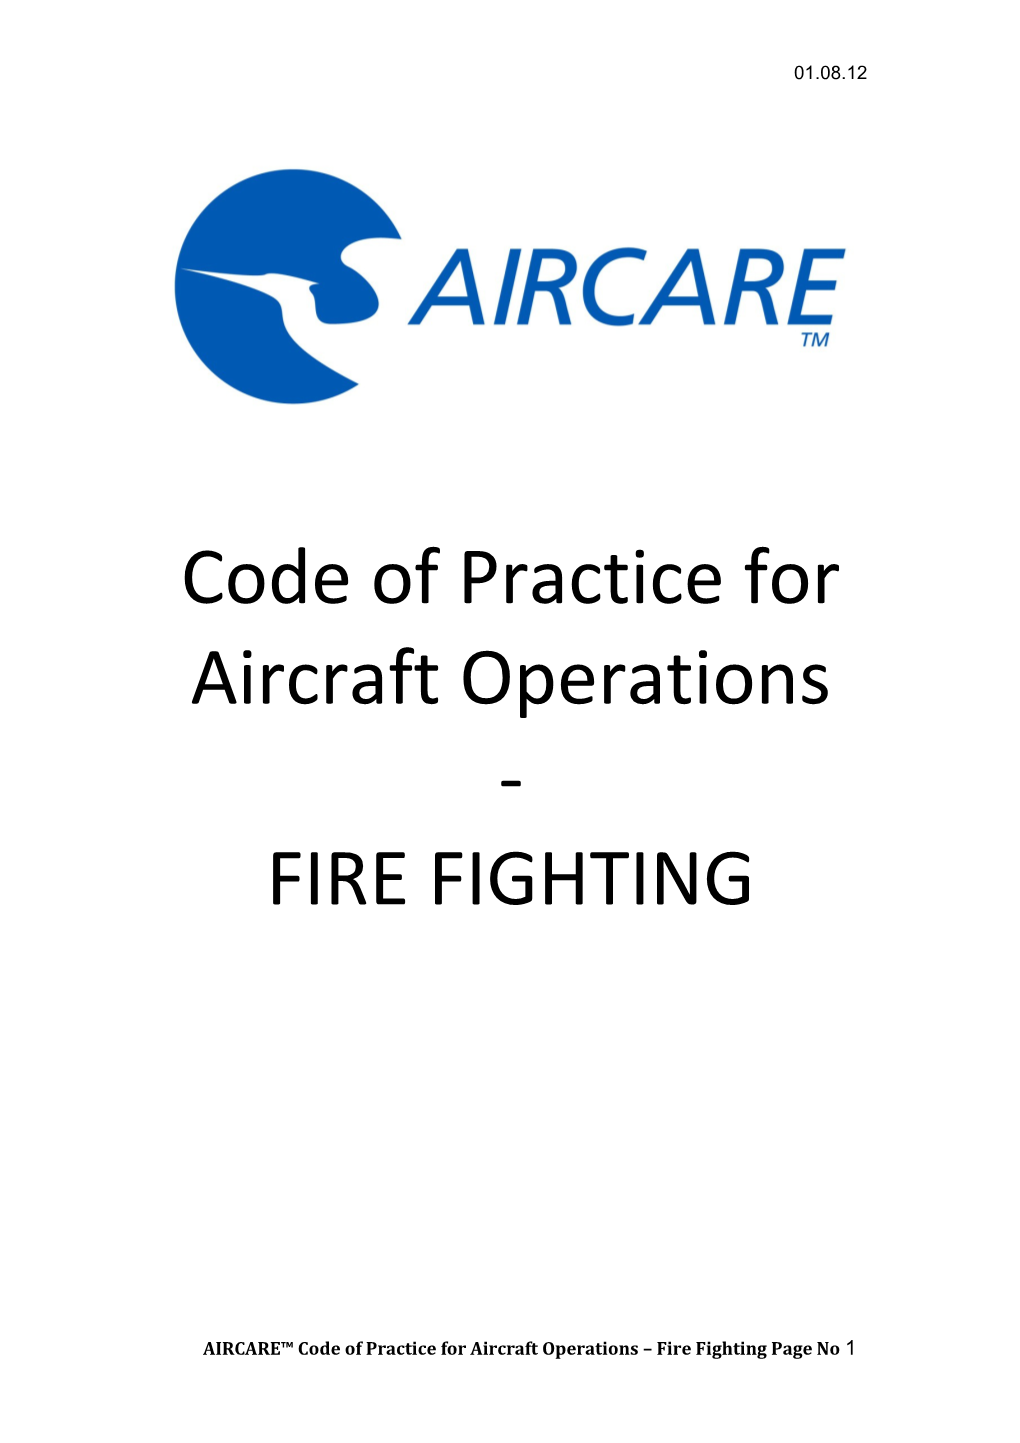 Code of Practice for Aircraft Operations